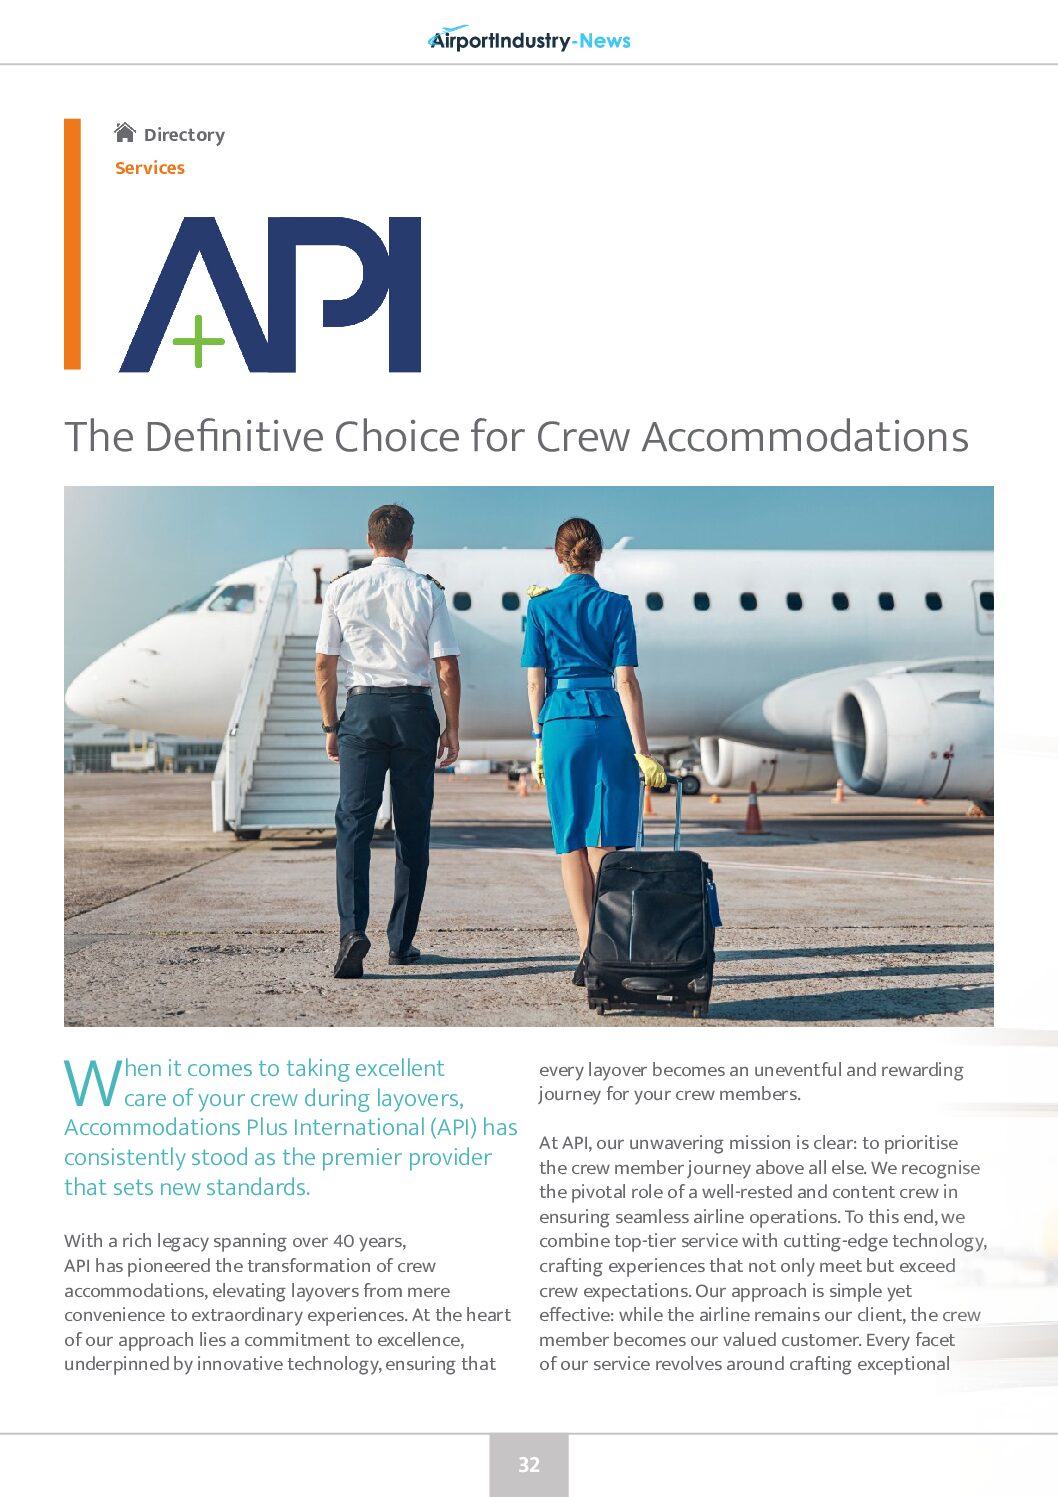 The Definitive Choice for Crew Accommodations